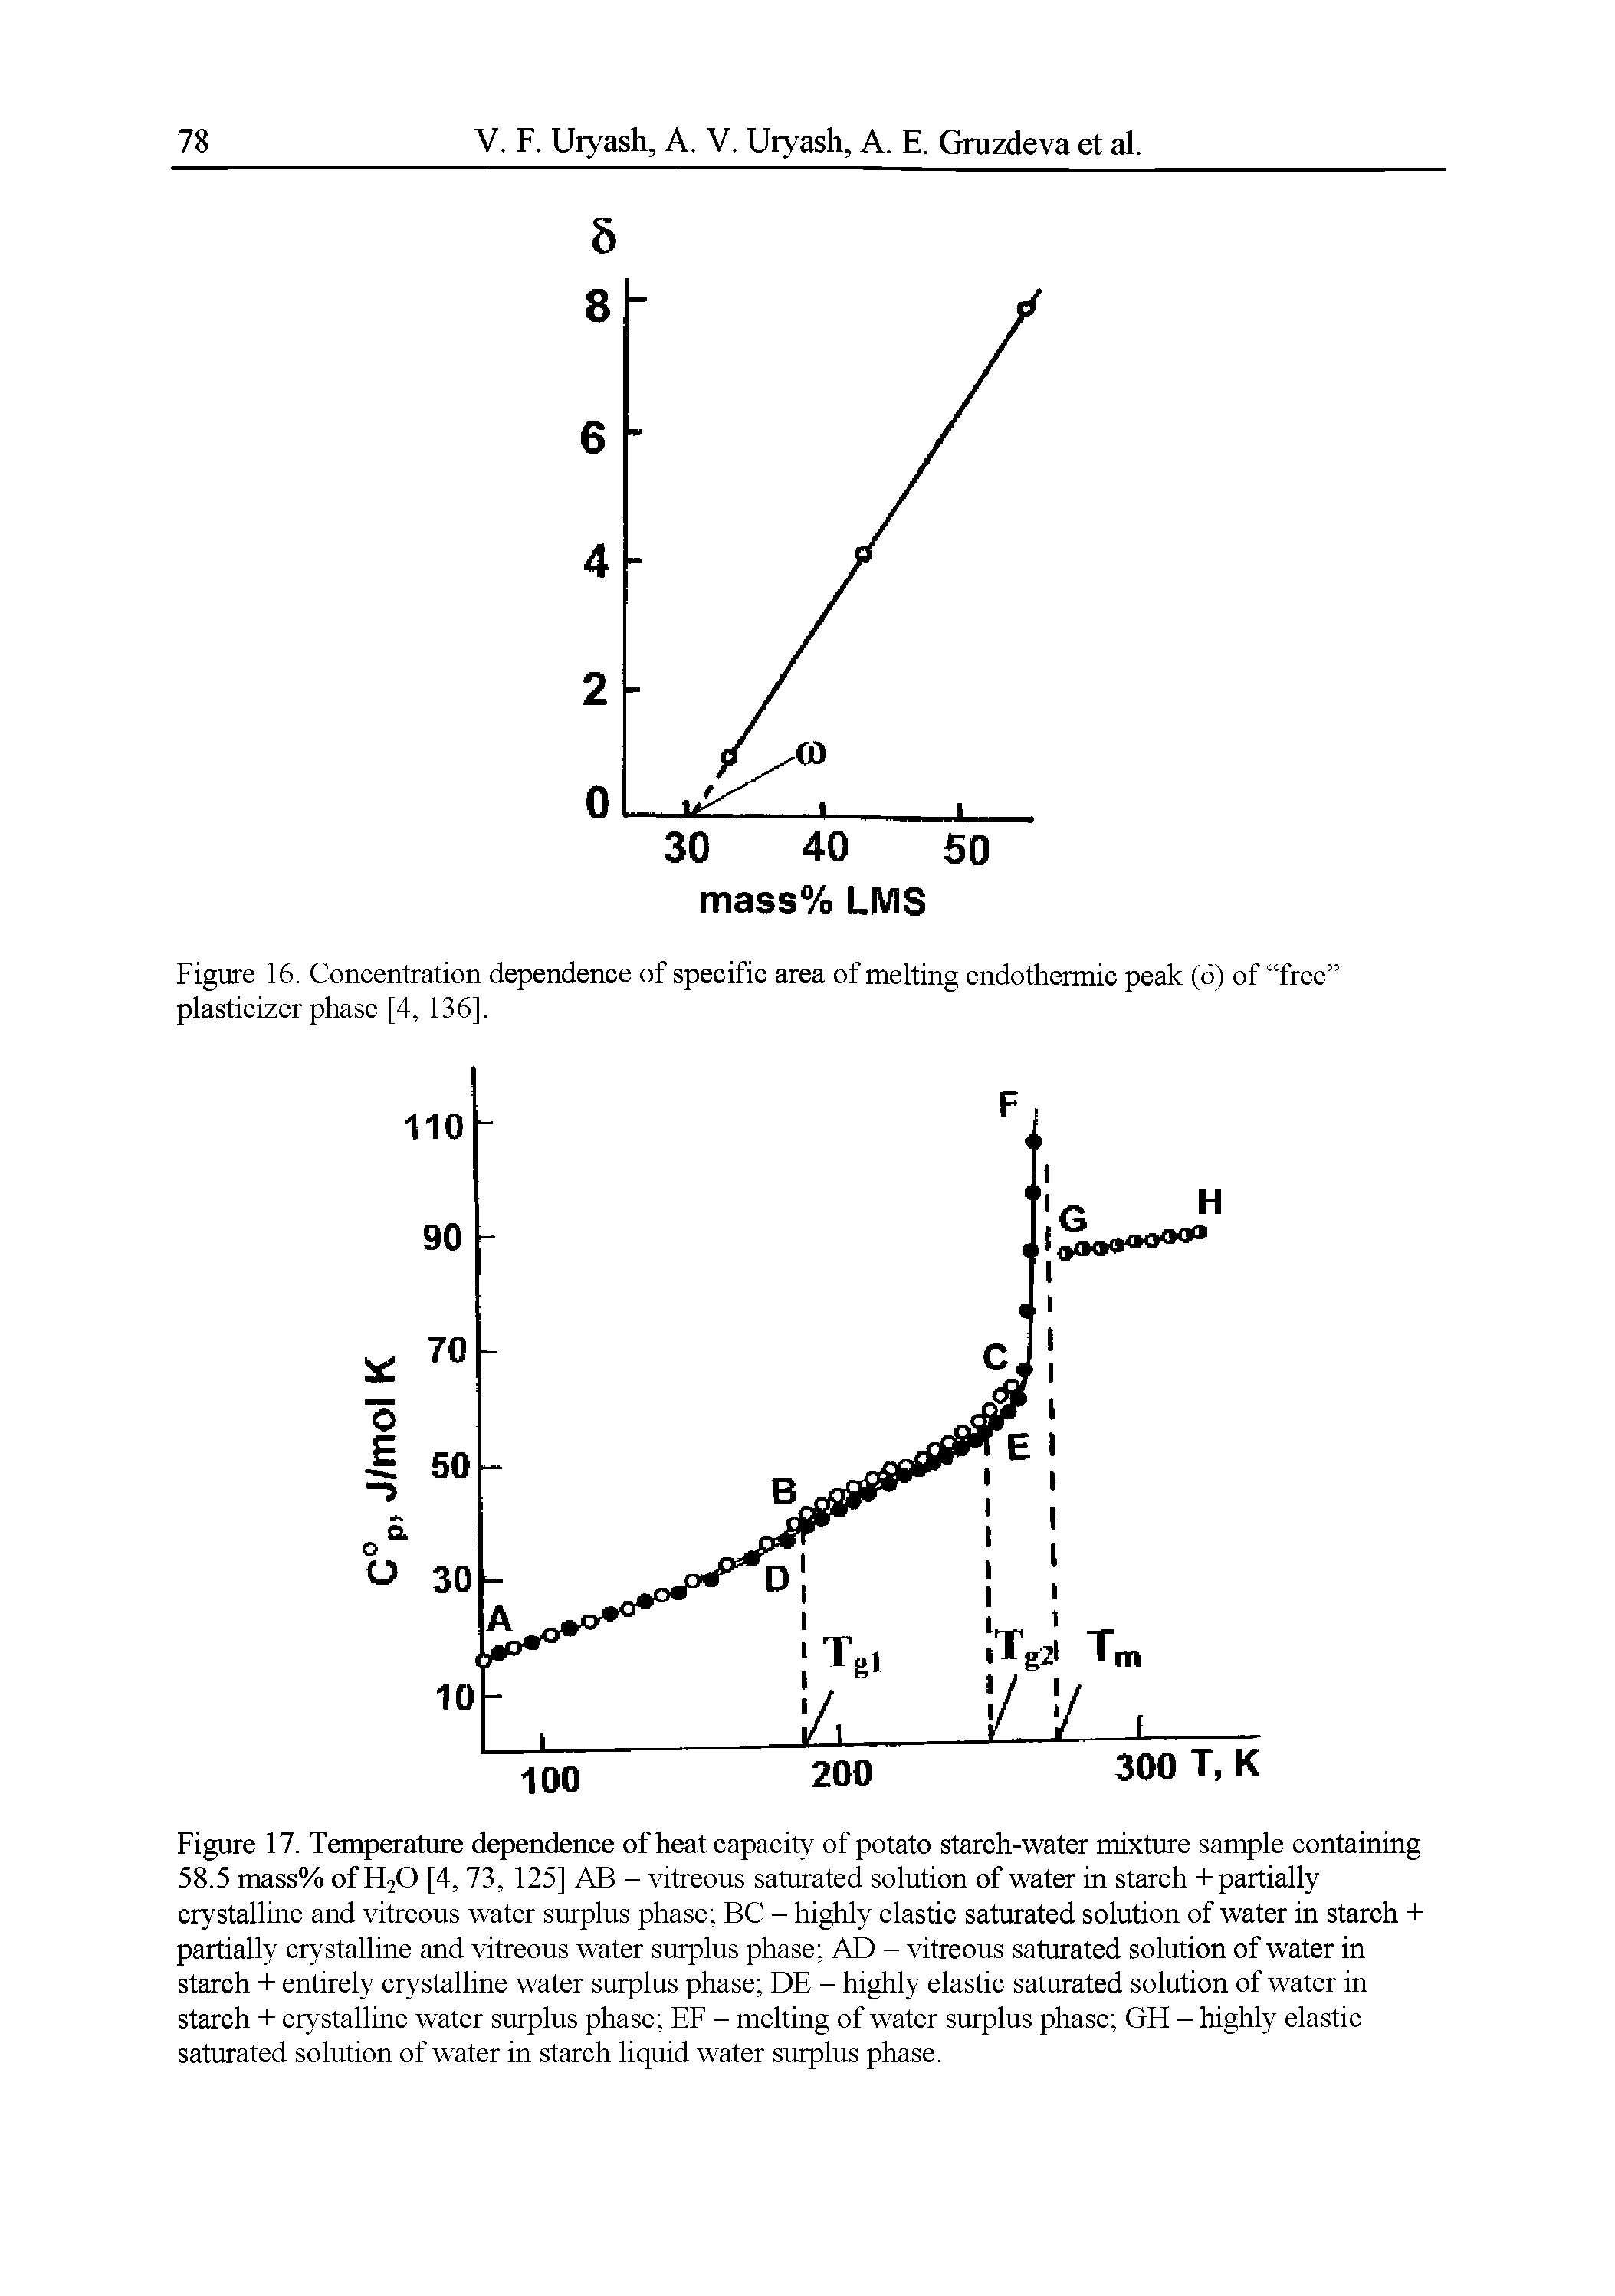 Figure 17. Temperature dependence of heat capacity of potato starch-water mixture sample containing 58.5 mass% of H2O [4,73, 125] AB - vitreous saturated solution of water in starch + partially crystalline and vitreous water surplus phase BC - highly elastic saturated solution of water in starch + partially crystalline and vitreous water surplus phase AD - vitreous saturated solution of water in starch + entirely crystalline water surplus phase DE - highly elastic saturated solution of water in starch + crystalline water surplus phase EF - melting of water surplus phase GH - highly elastic saturated solution of water in starch liquid water surplus phase.